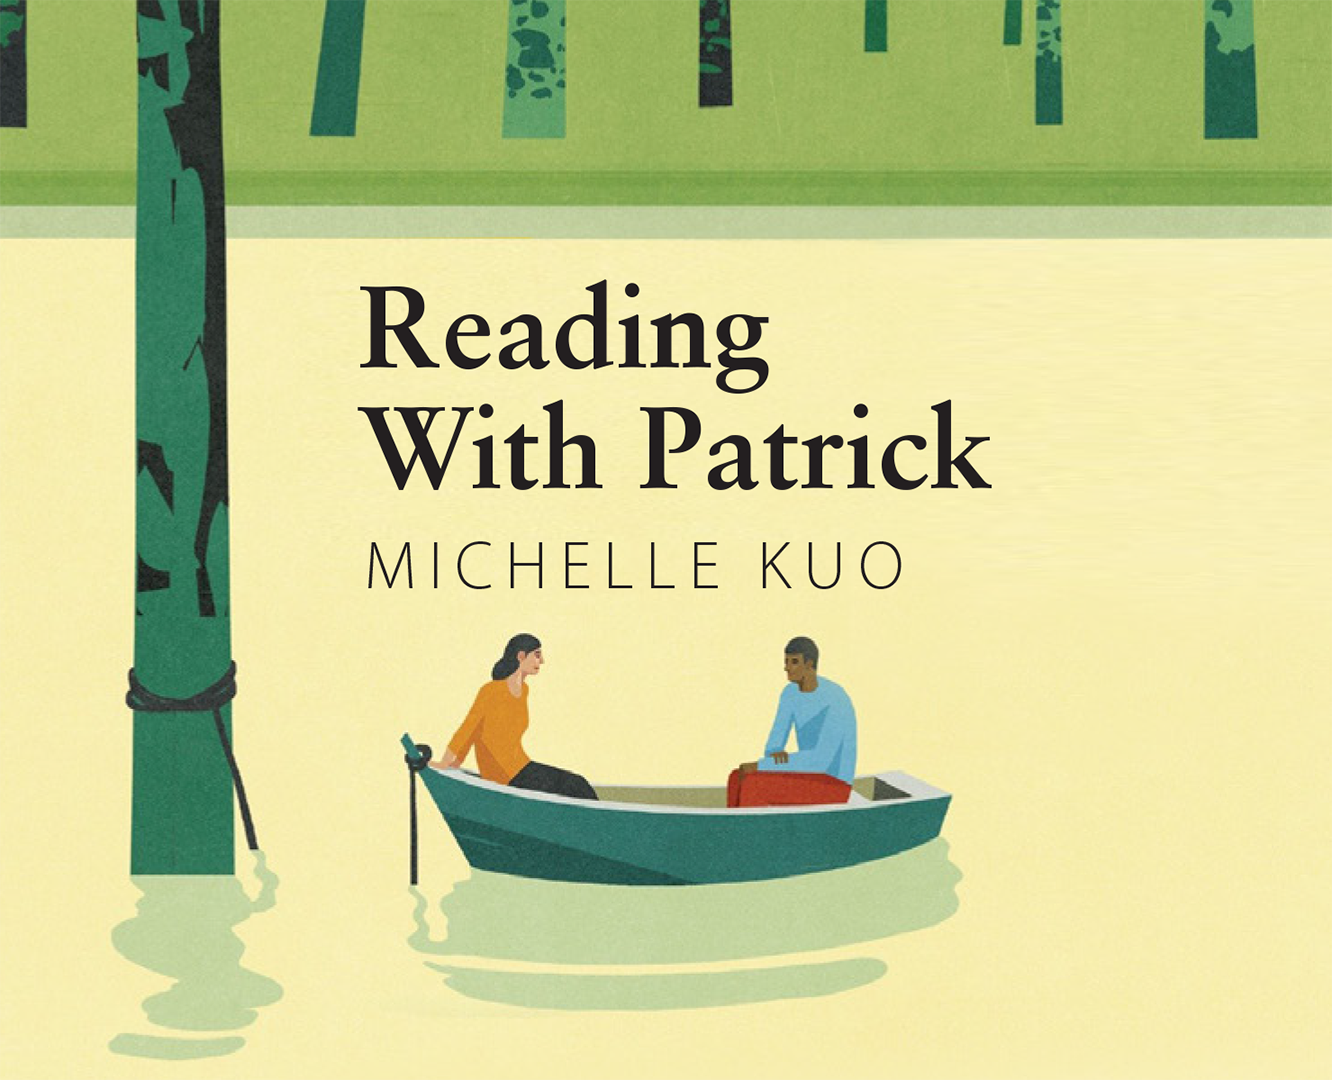 reading with patrick by michelle kuo